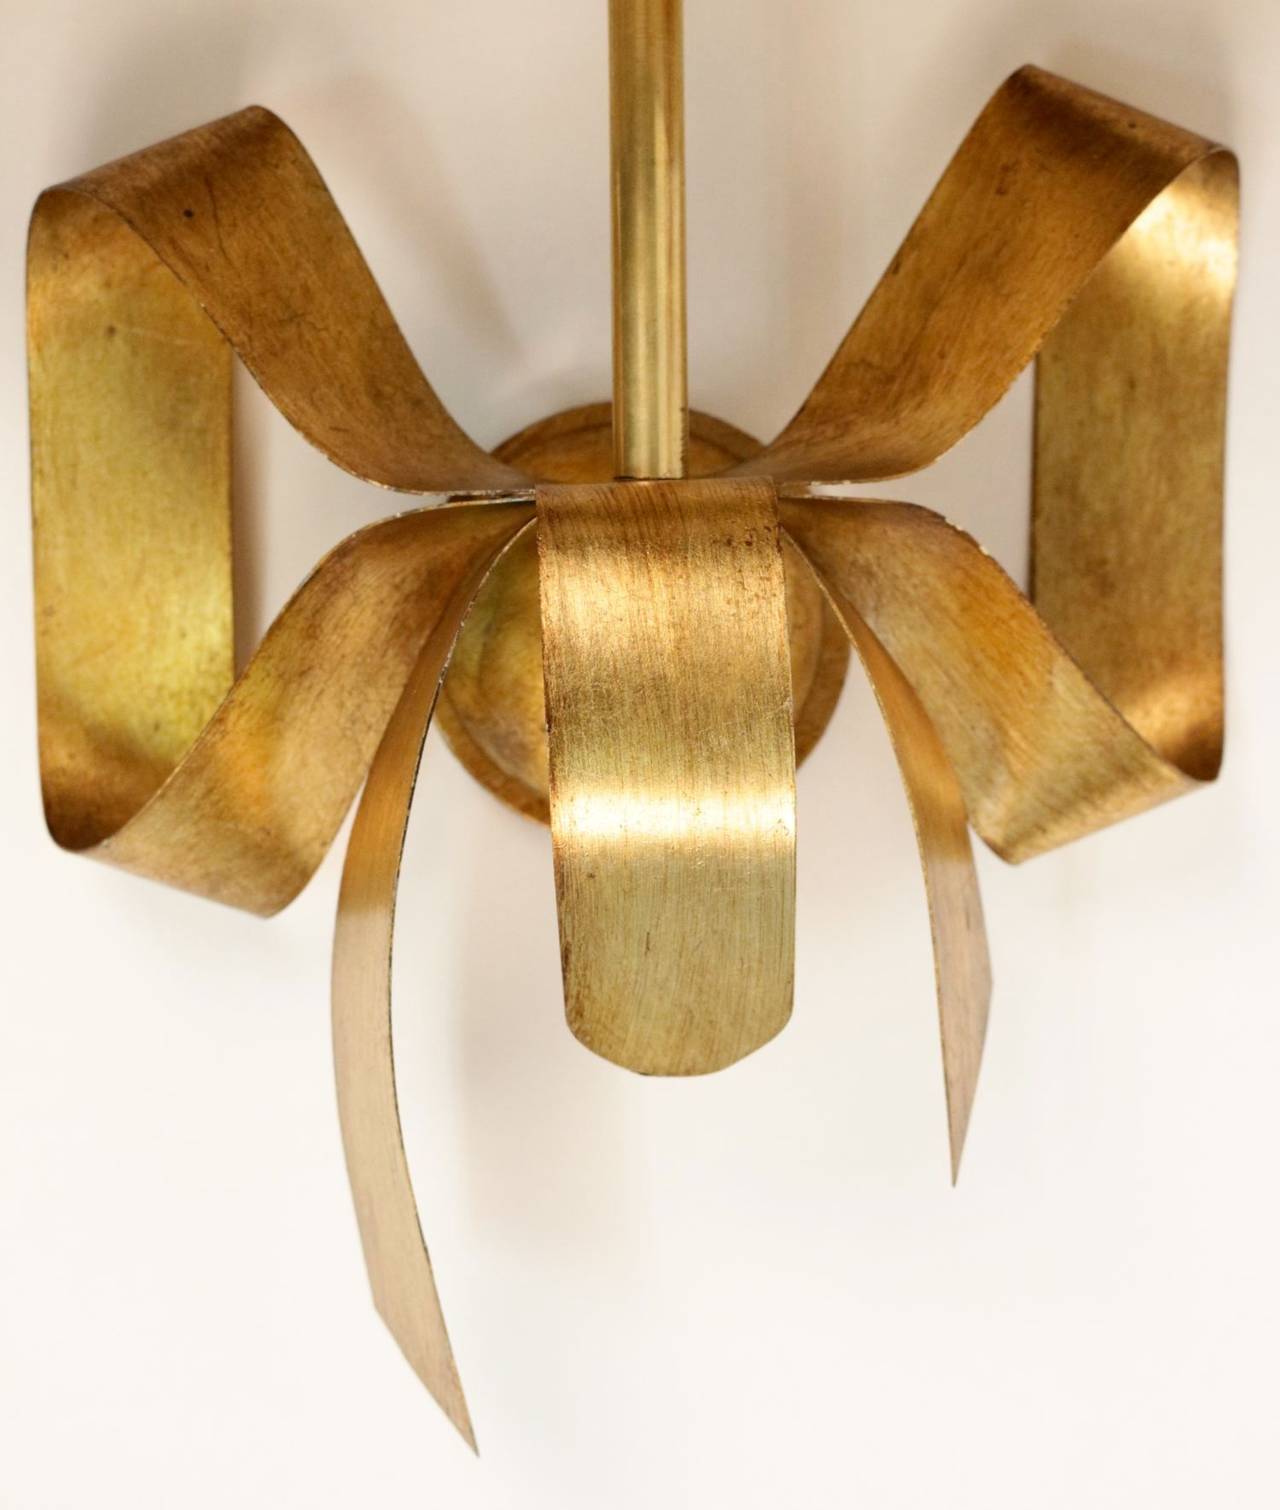 Pair of 1970s 'Pretty Knot' model sconces by Maison FlorArt.
The large knot is in gilt sheet metal. Tailored lampshade with three faces. Rectangular shape. Gold color inside and black outside. One lighted arm per sconce.